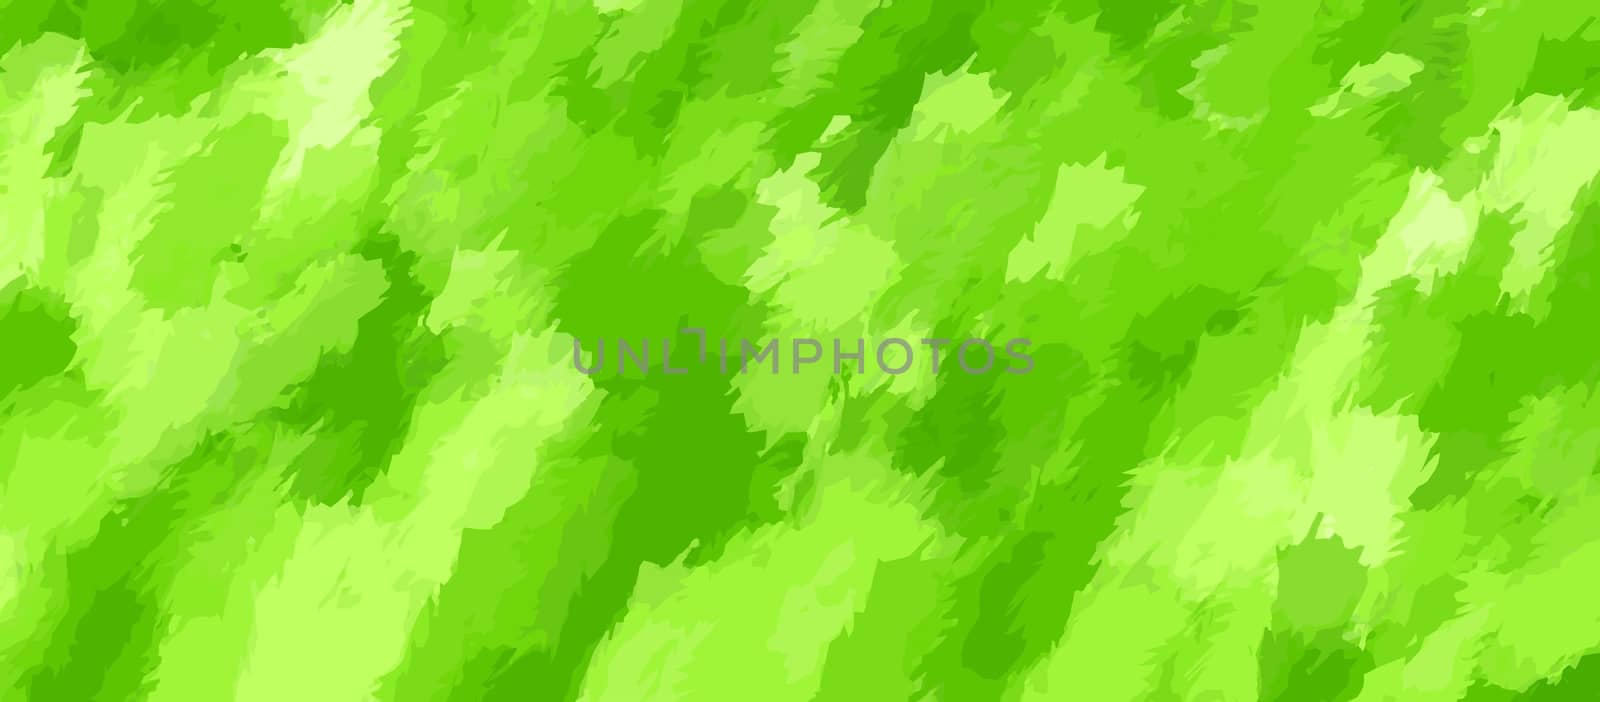 green painting abstract texture background by Timmi